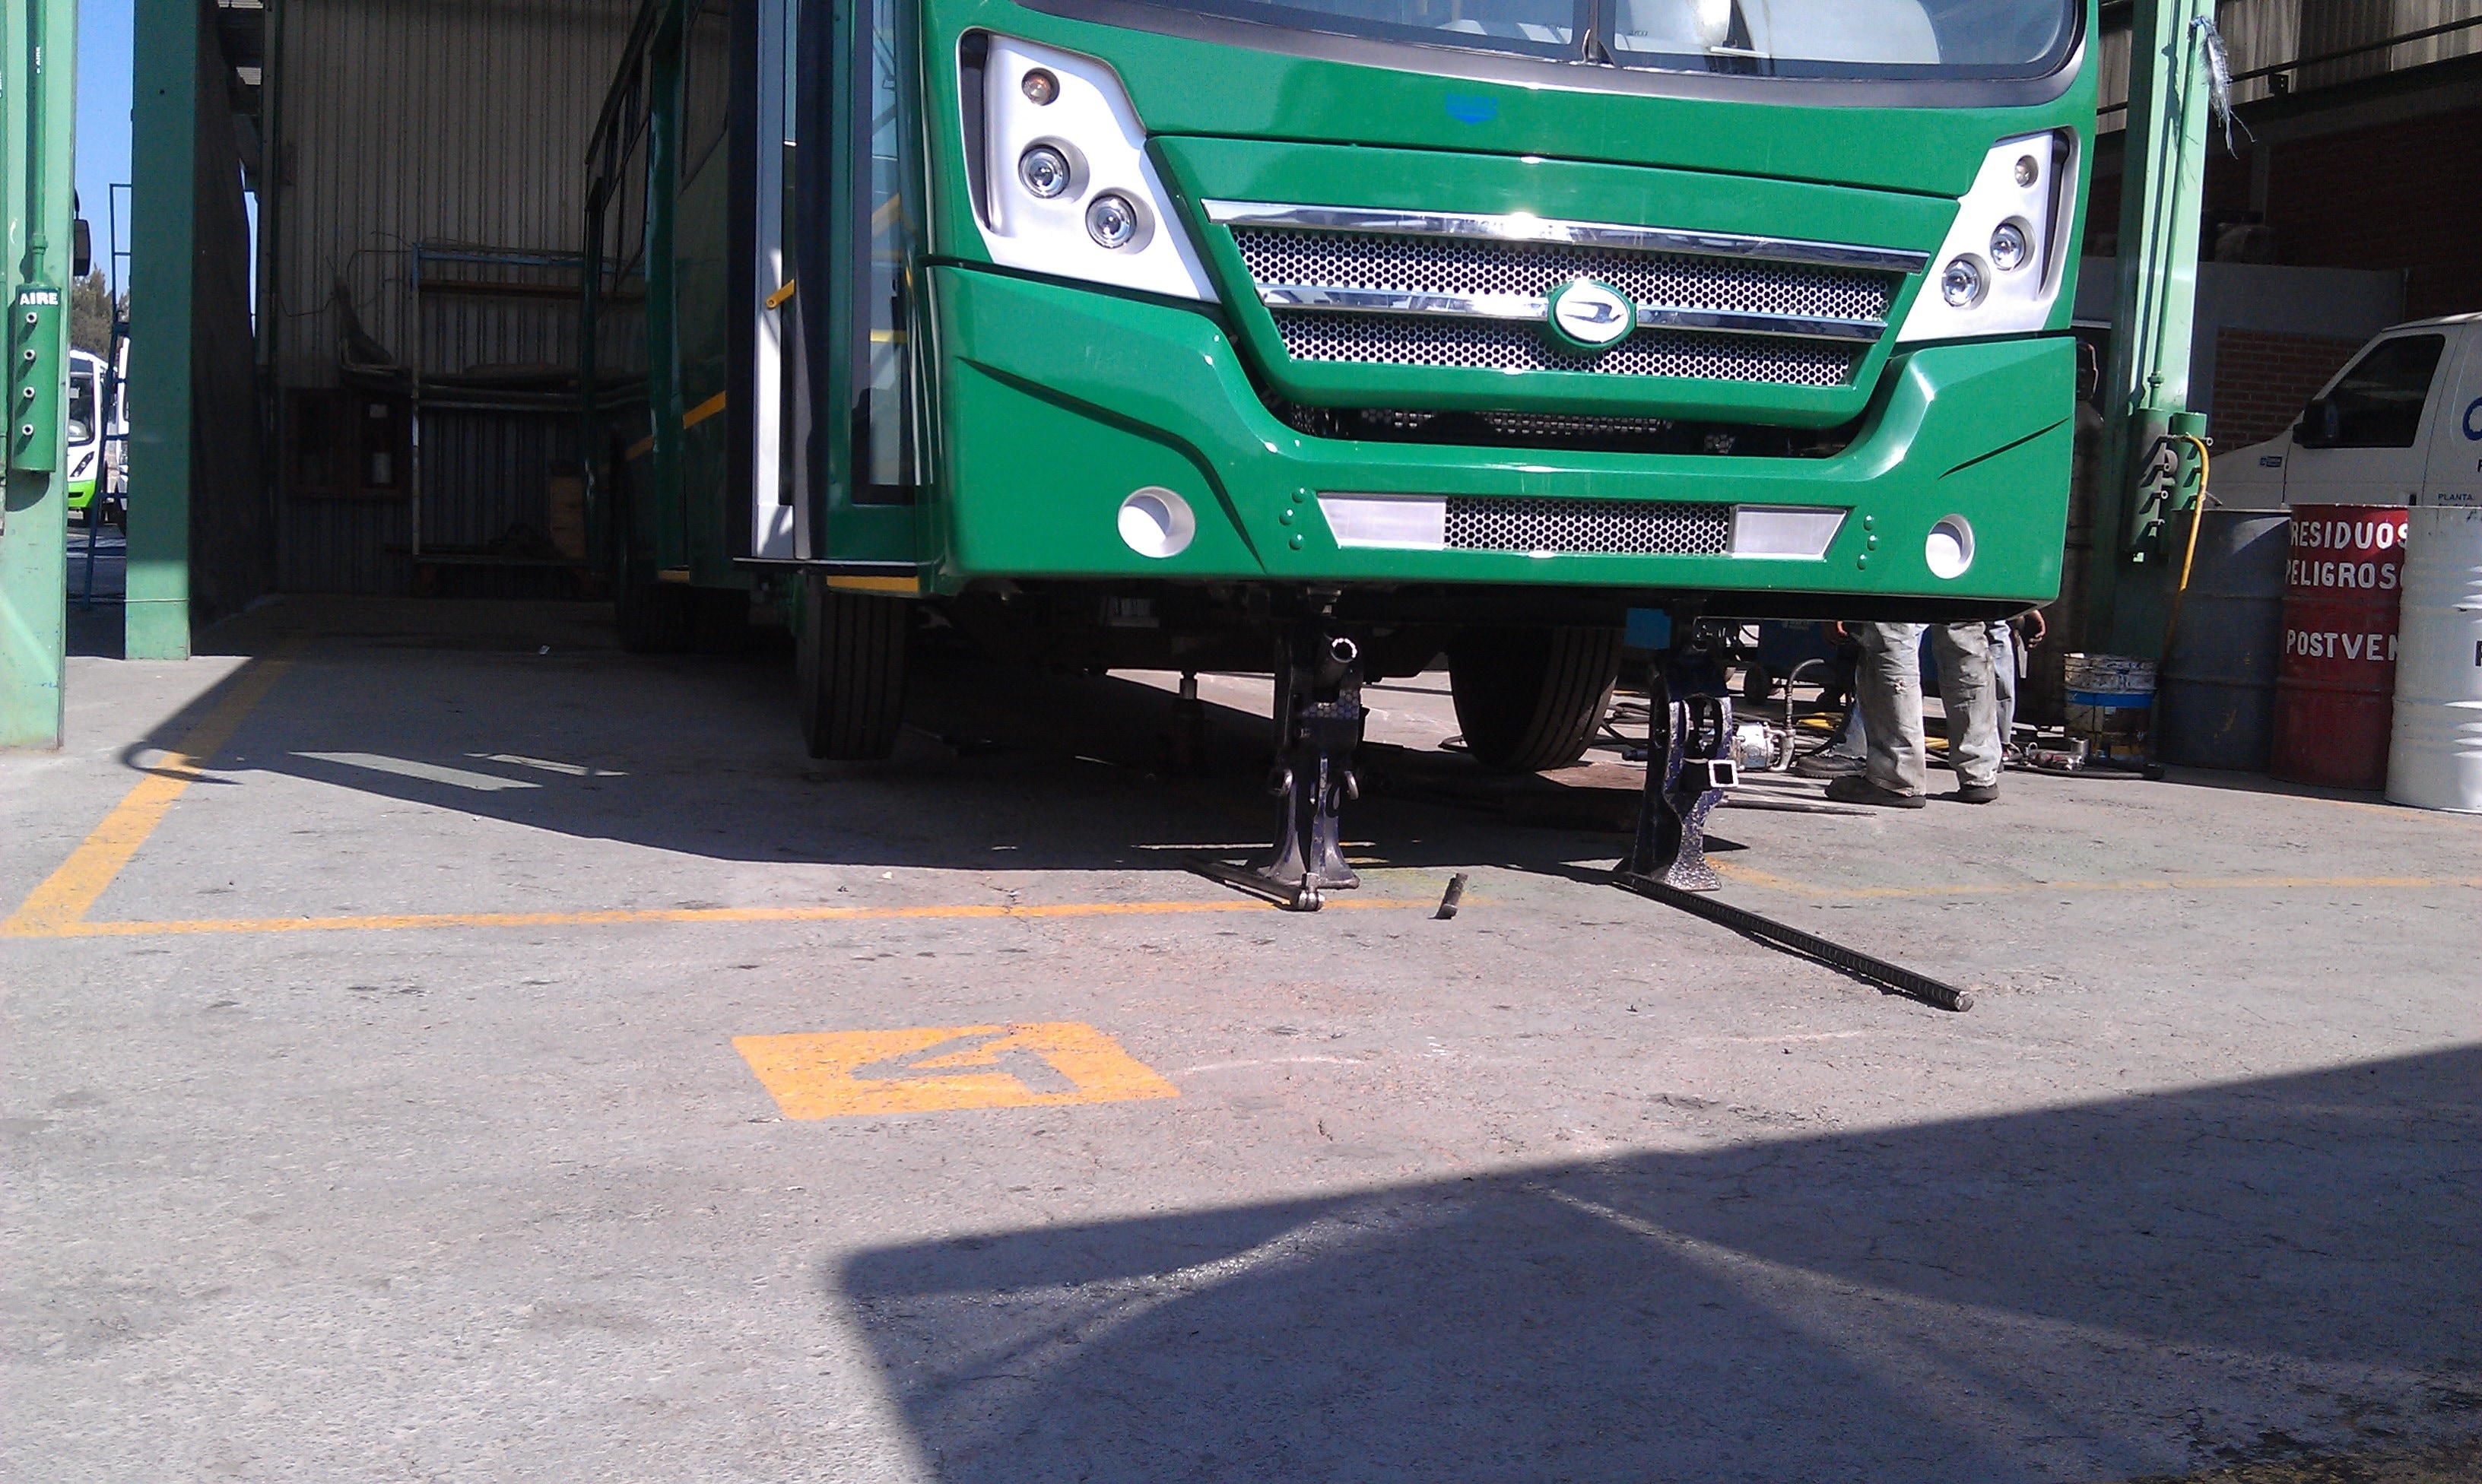 two black scissor jack under of green bus during day time